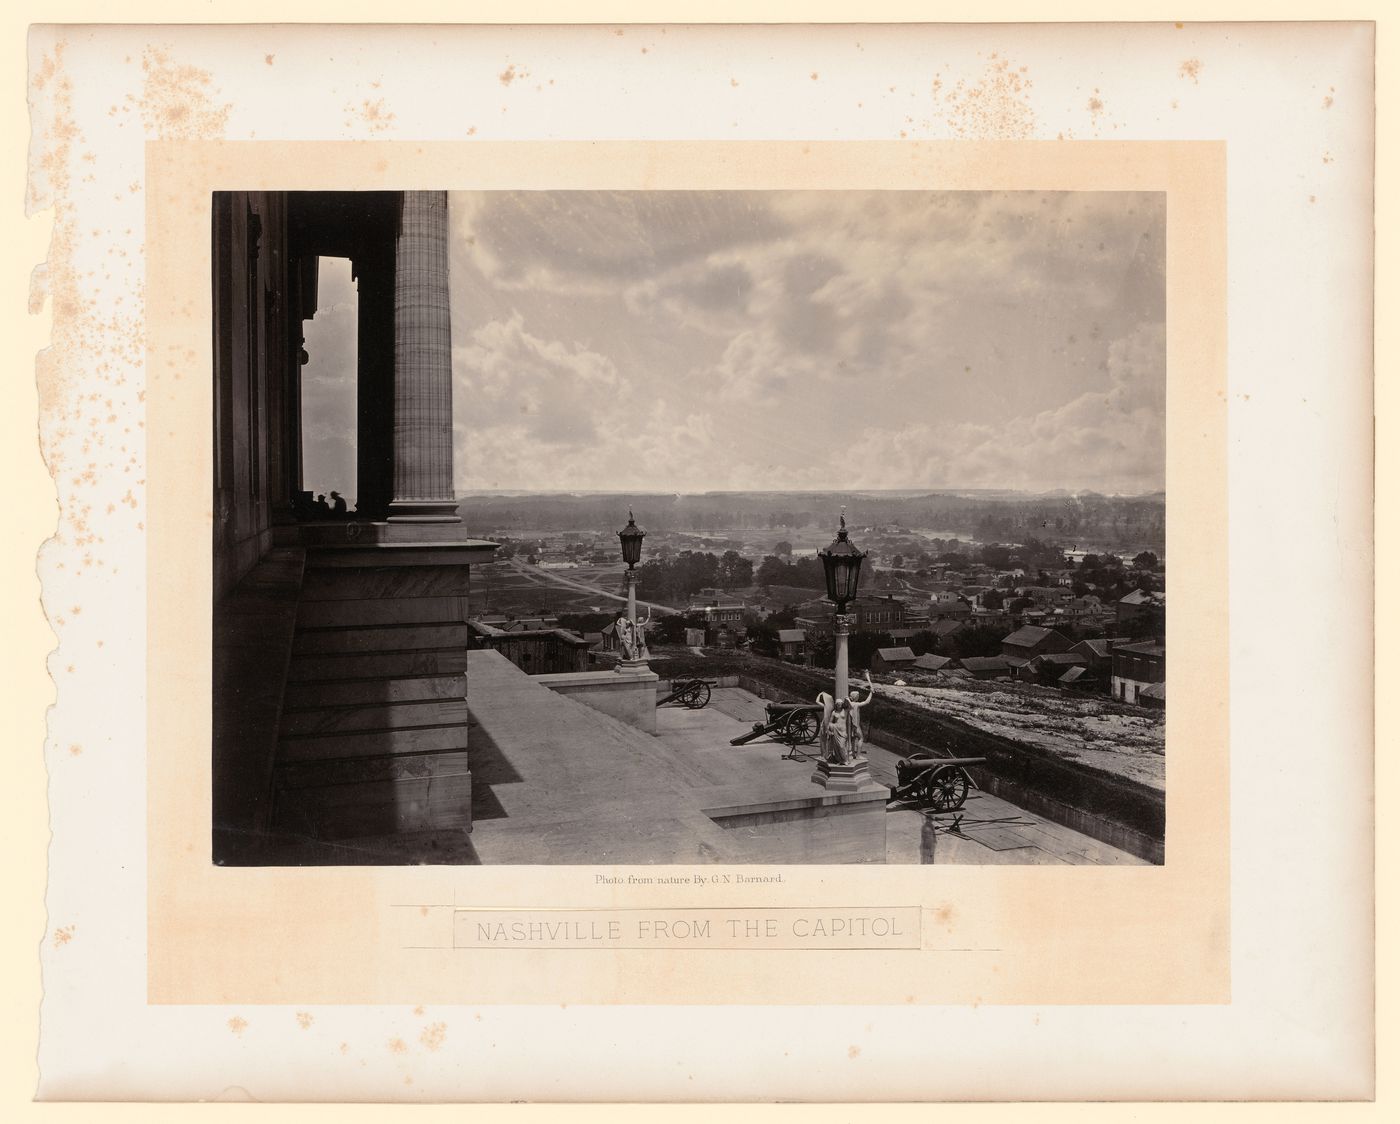 View from capitol building, Nashville, Tennessee